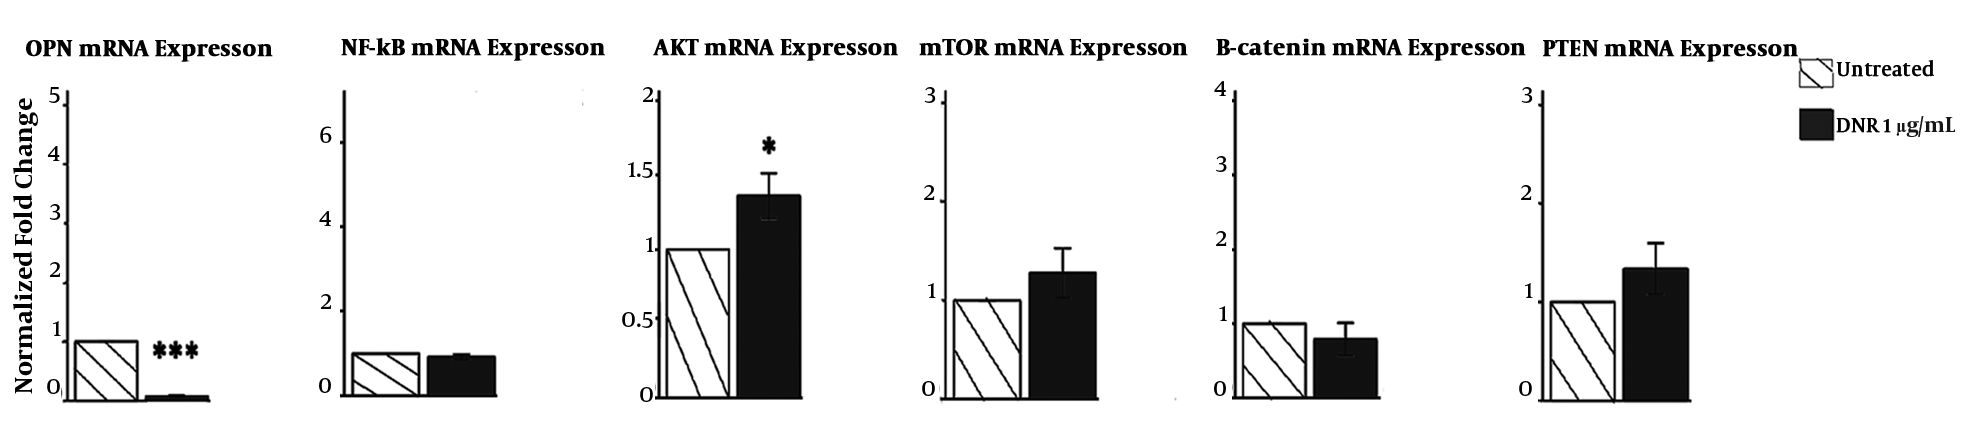 The transcriptional profile by qrt - PCR presented that DNR decreases the mRNA expression of OPN, but not NF - kB/RelB, AKT1, mTOR, β - catenin, or Pten. The graphs represent 3 independent experiments (mean ± SD). *P < 0.05, **P < 0.01, ***P < 0.001 (compared with control or comparisons depicted).